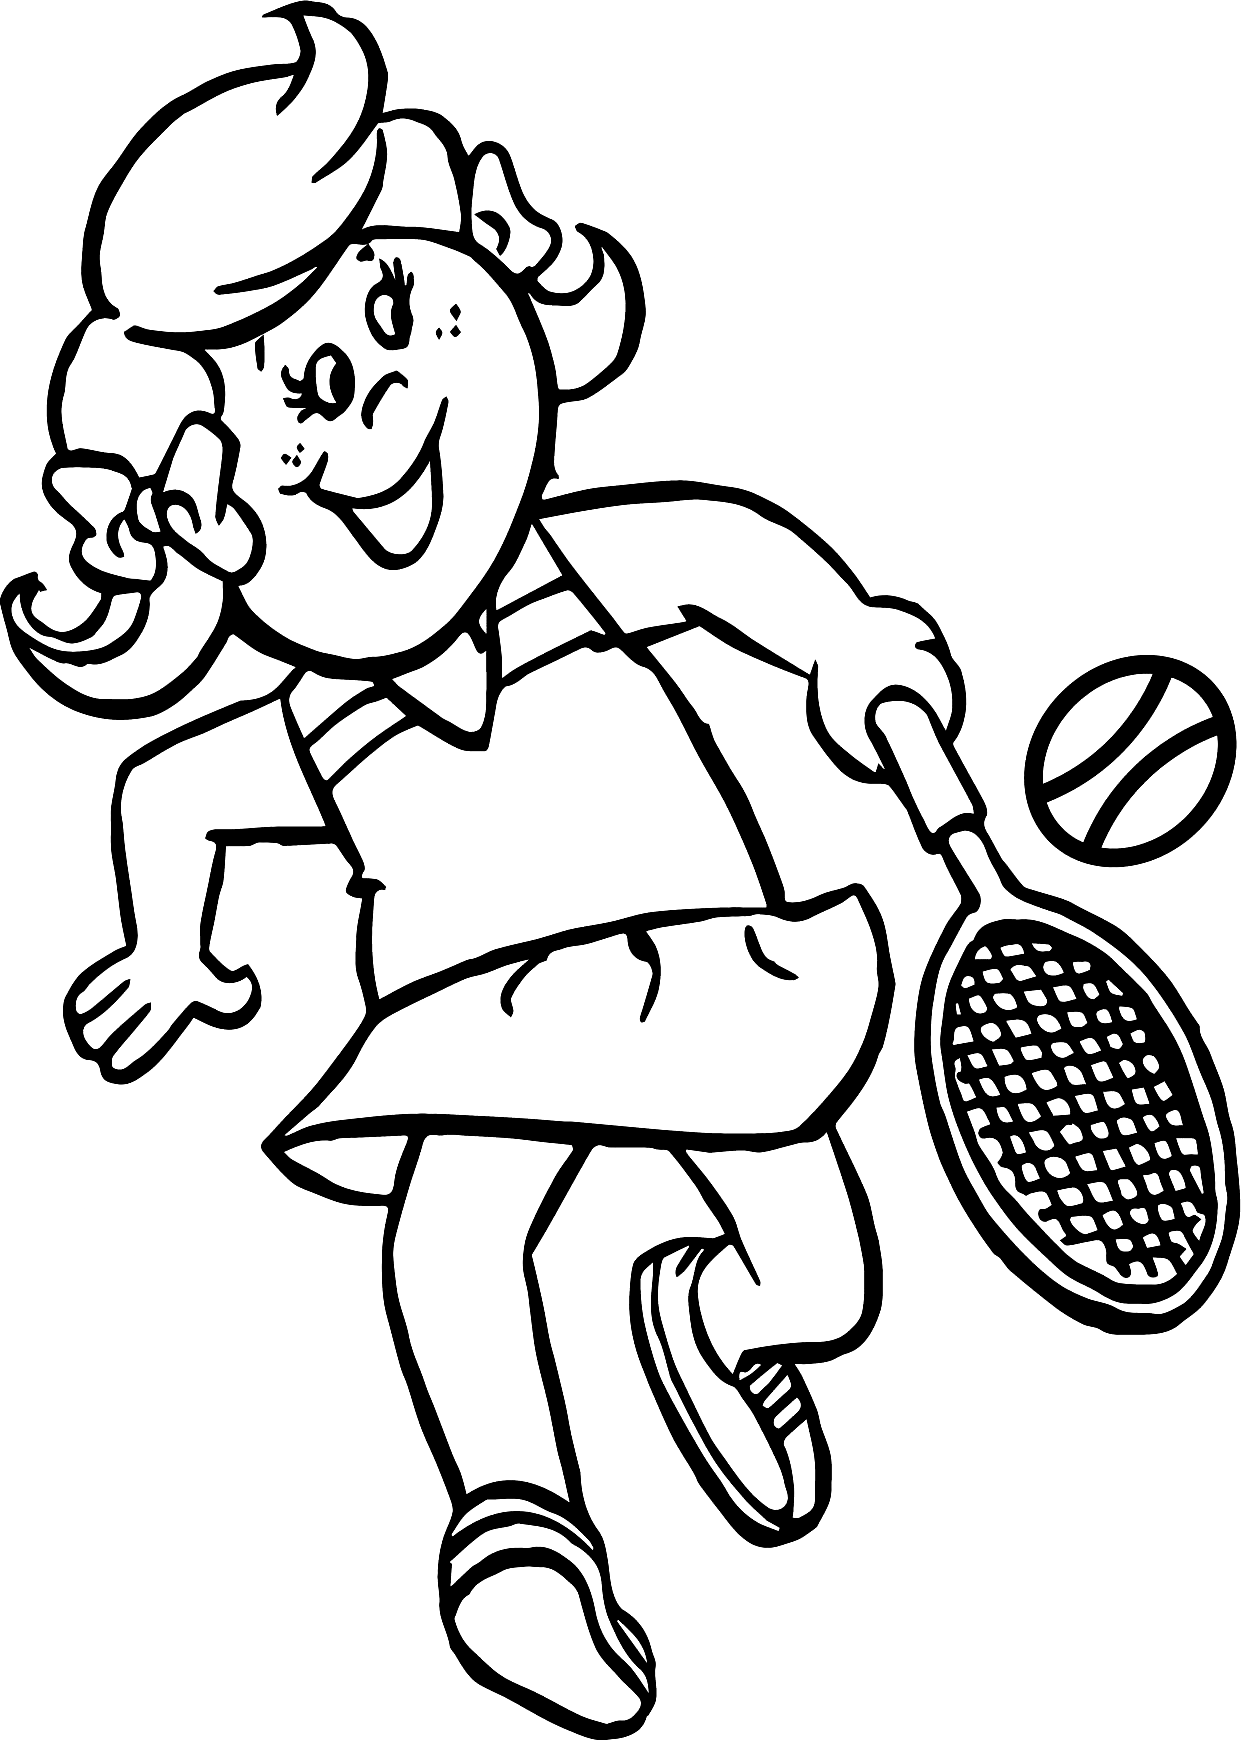 Kid Playing Tennis Coloring Page